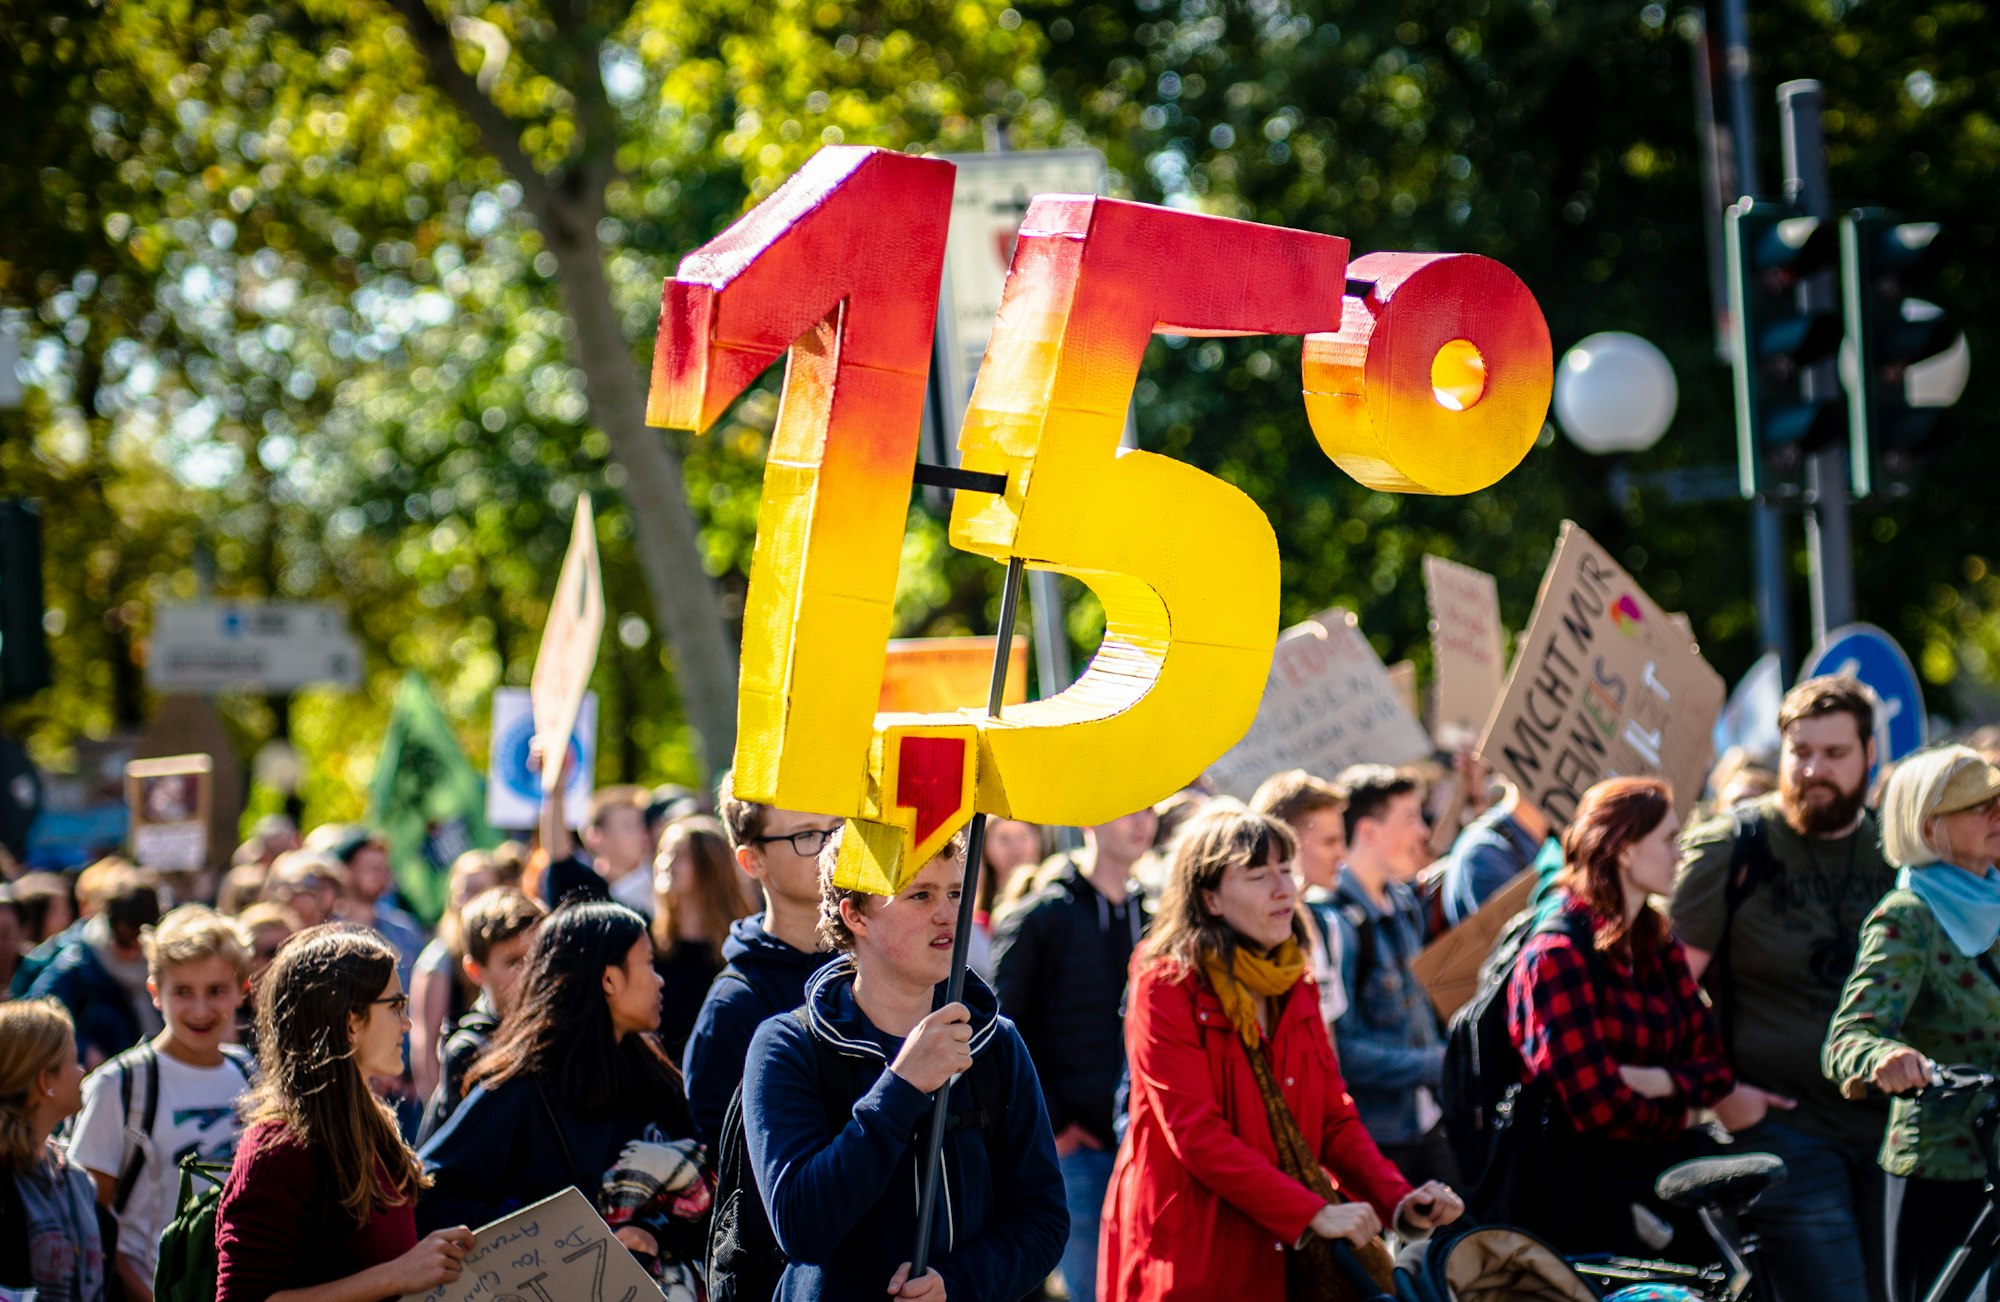 1.5 Degrees Celsius is the magical border - after that, there's no going back. Unfortunately. We are at 1 Degree Celsius right now. 
Fridays For Future, 20.09.2019 in Bonn, Germany